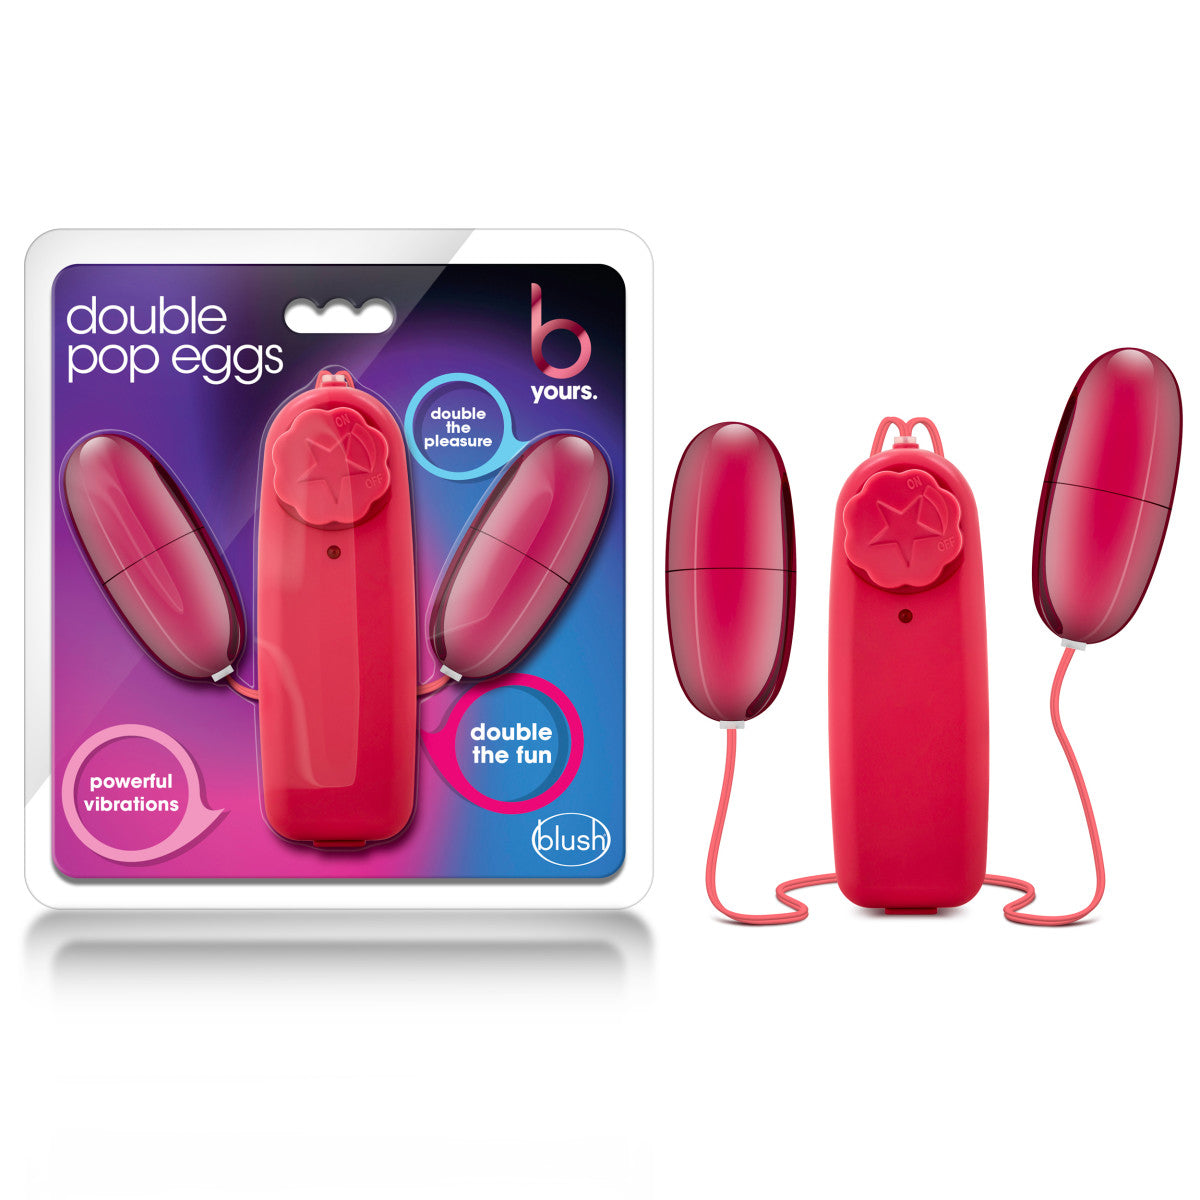 B Yours Double Pop Egg Cerise 2-Inch Vibrating Egg